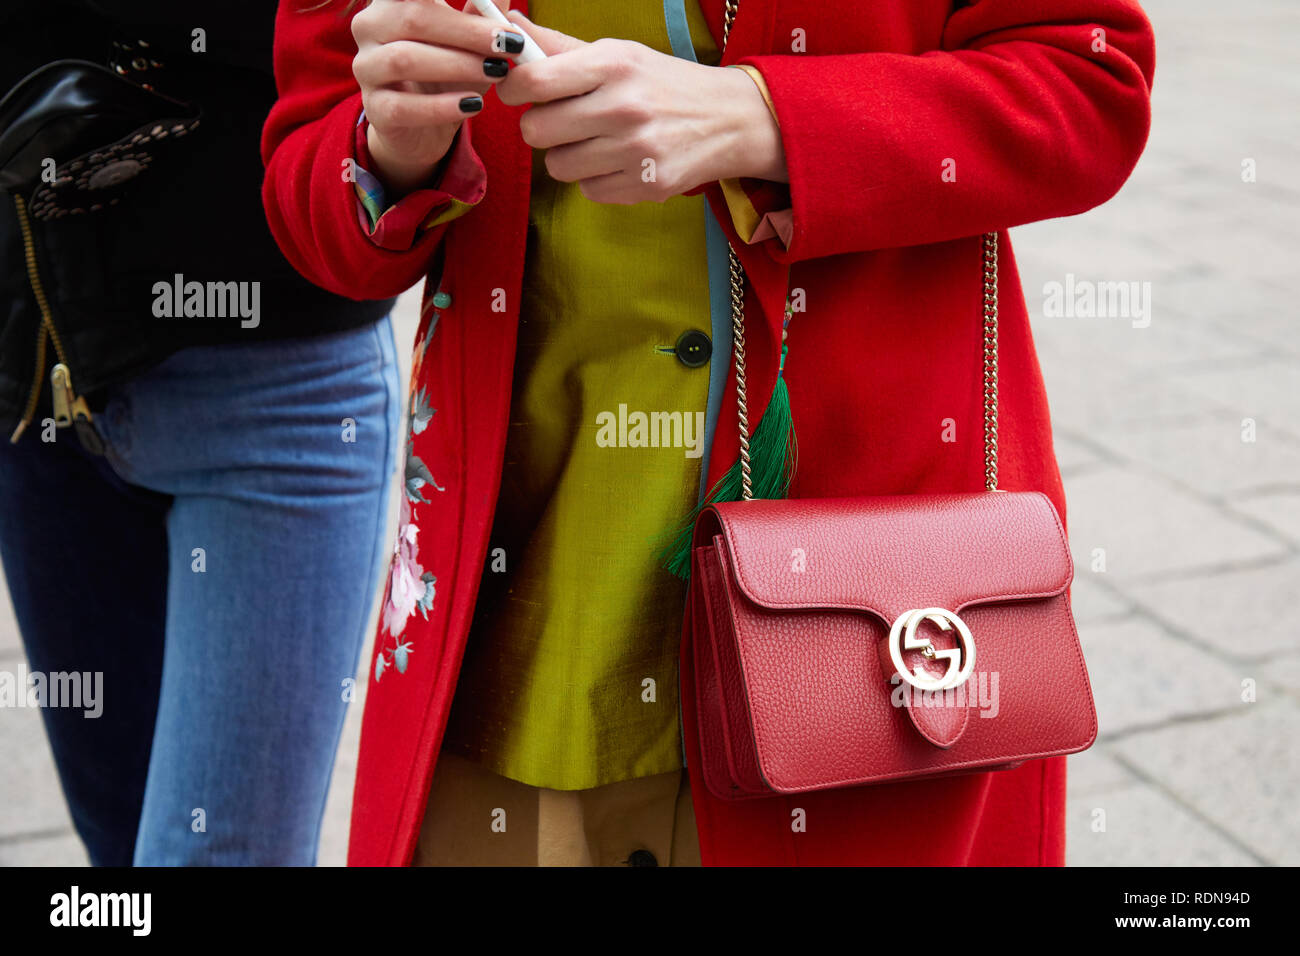 MILAN, ITALY - JANUARY 12, 2019: Woman with red Gucci leather bag